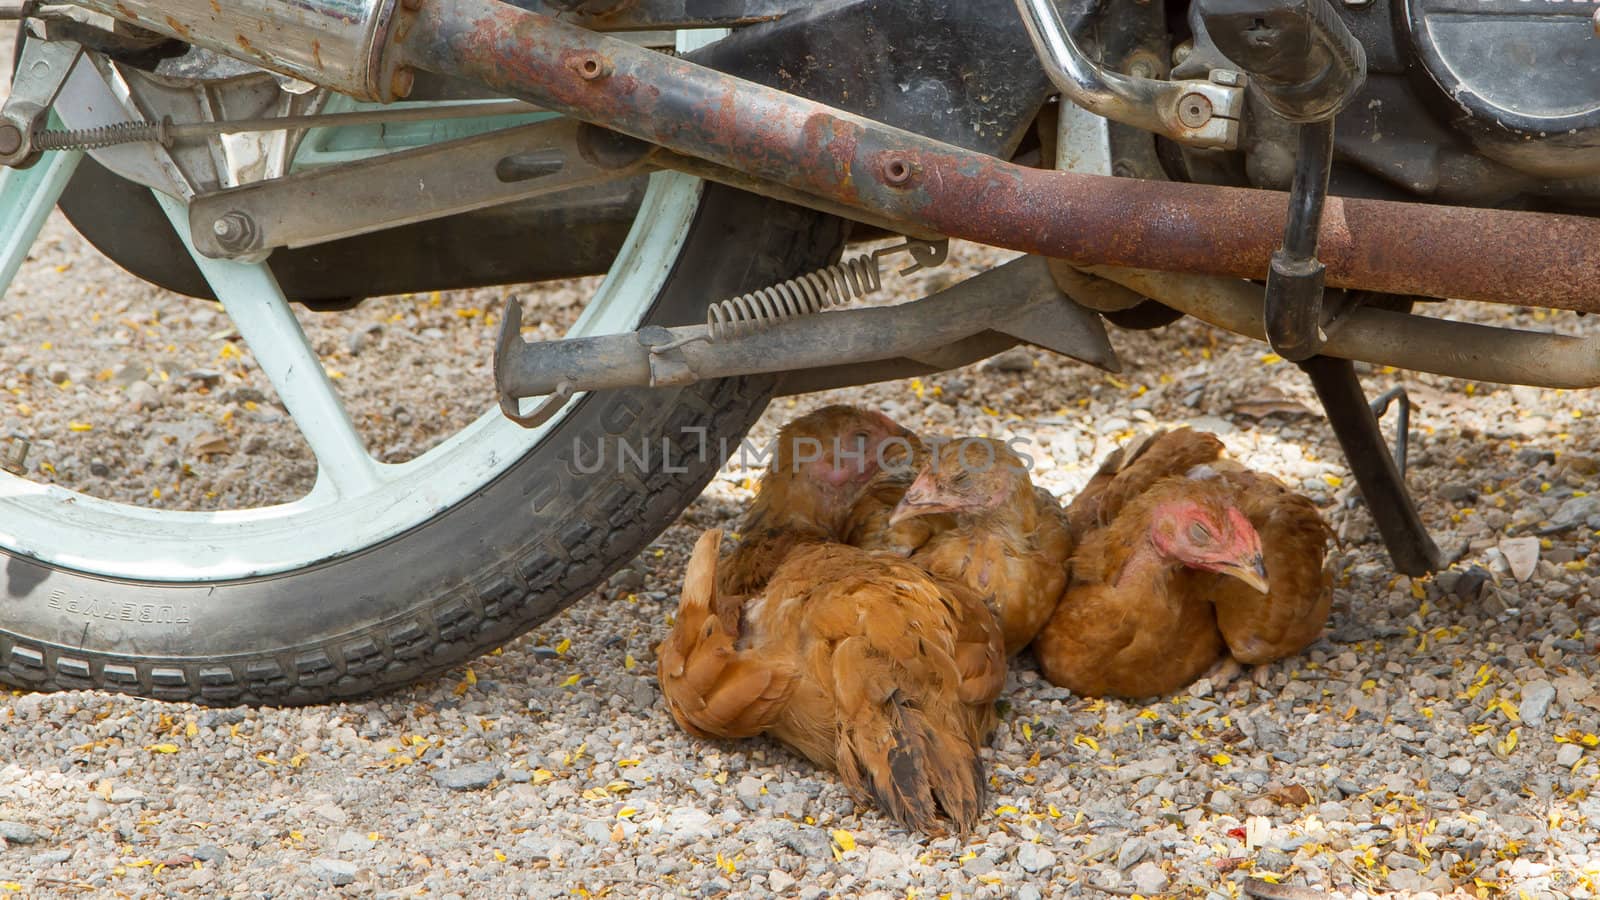 Brown chickens resting underneath a motorcycle by michaklootwijk